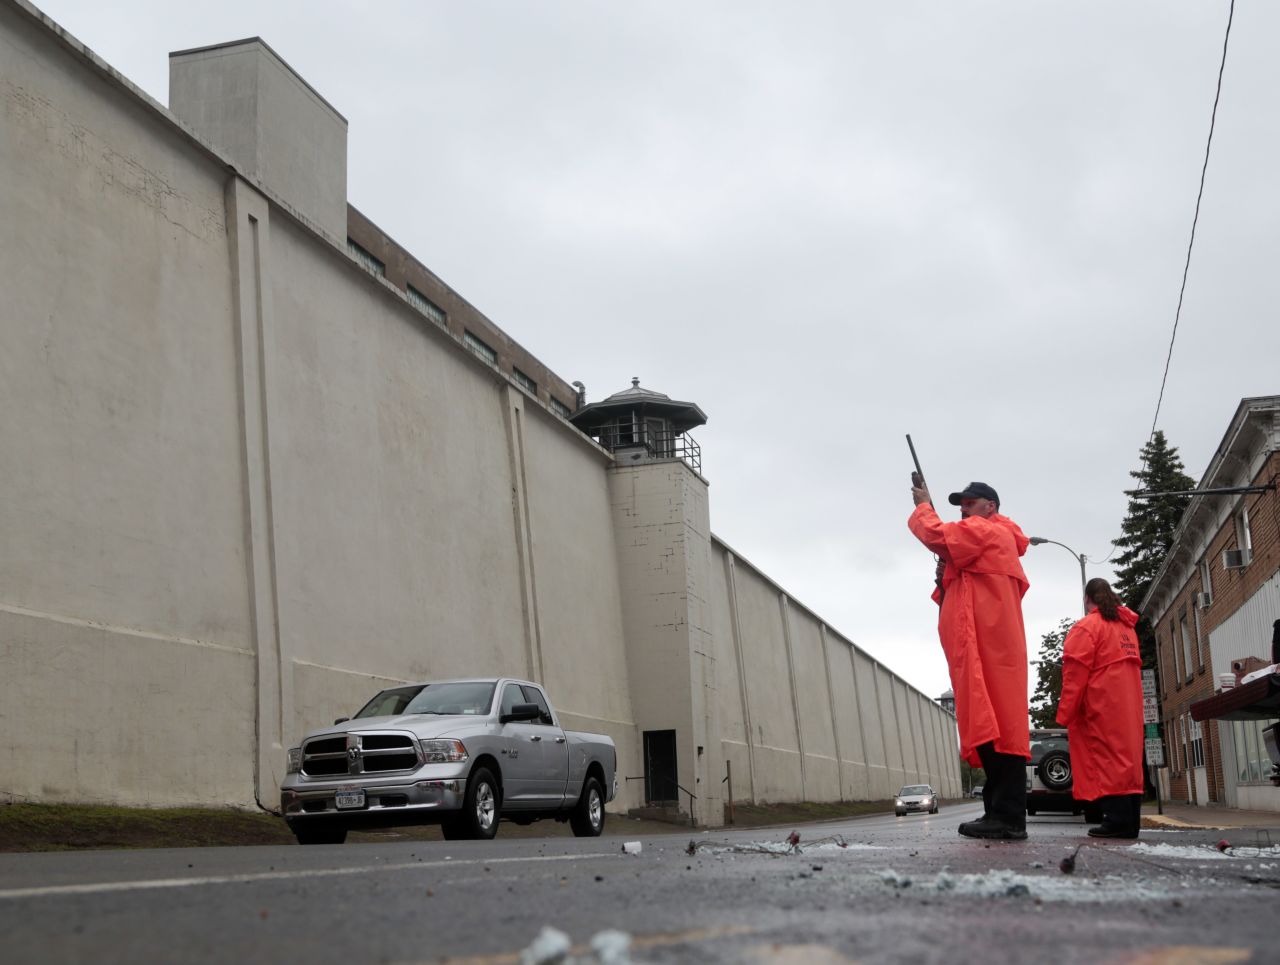 State corrections officers monitor traffic June 8 at the Clinton Correctional Facility. <a href="http://www.cnn.com/2015/06/06/us/gallery/new-york-escapees/index.html" target="_blank">See photos of the route the escaped prisoners took</a>